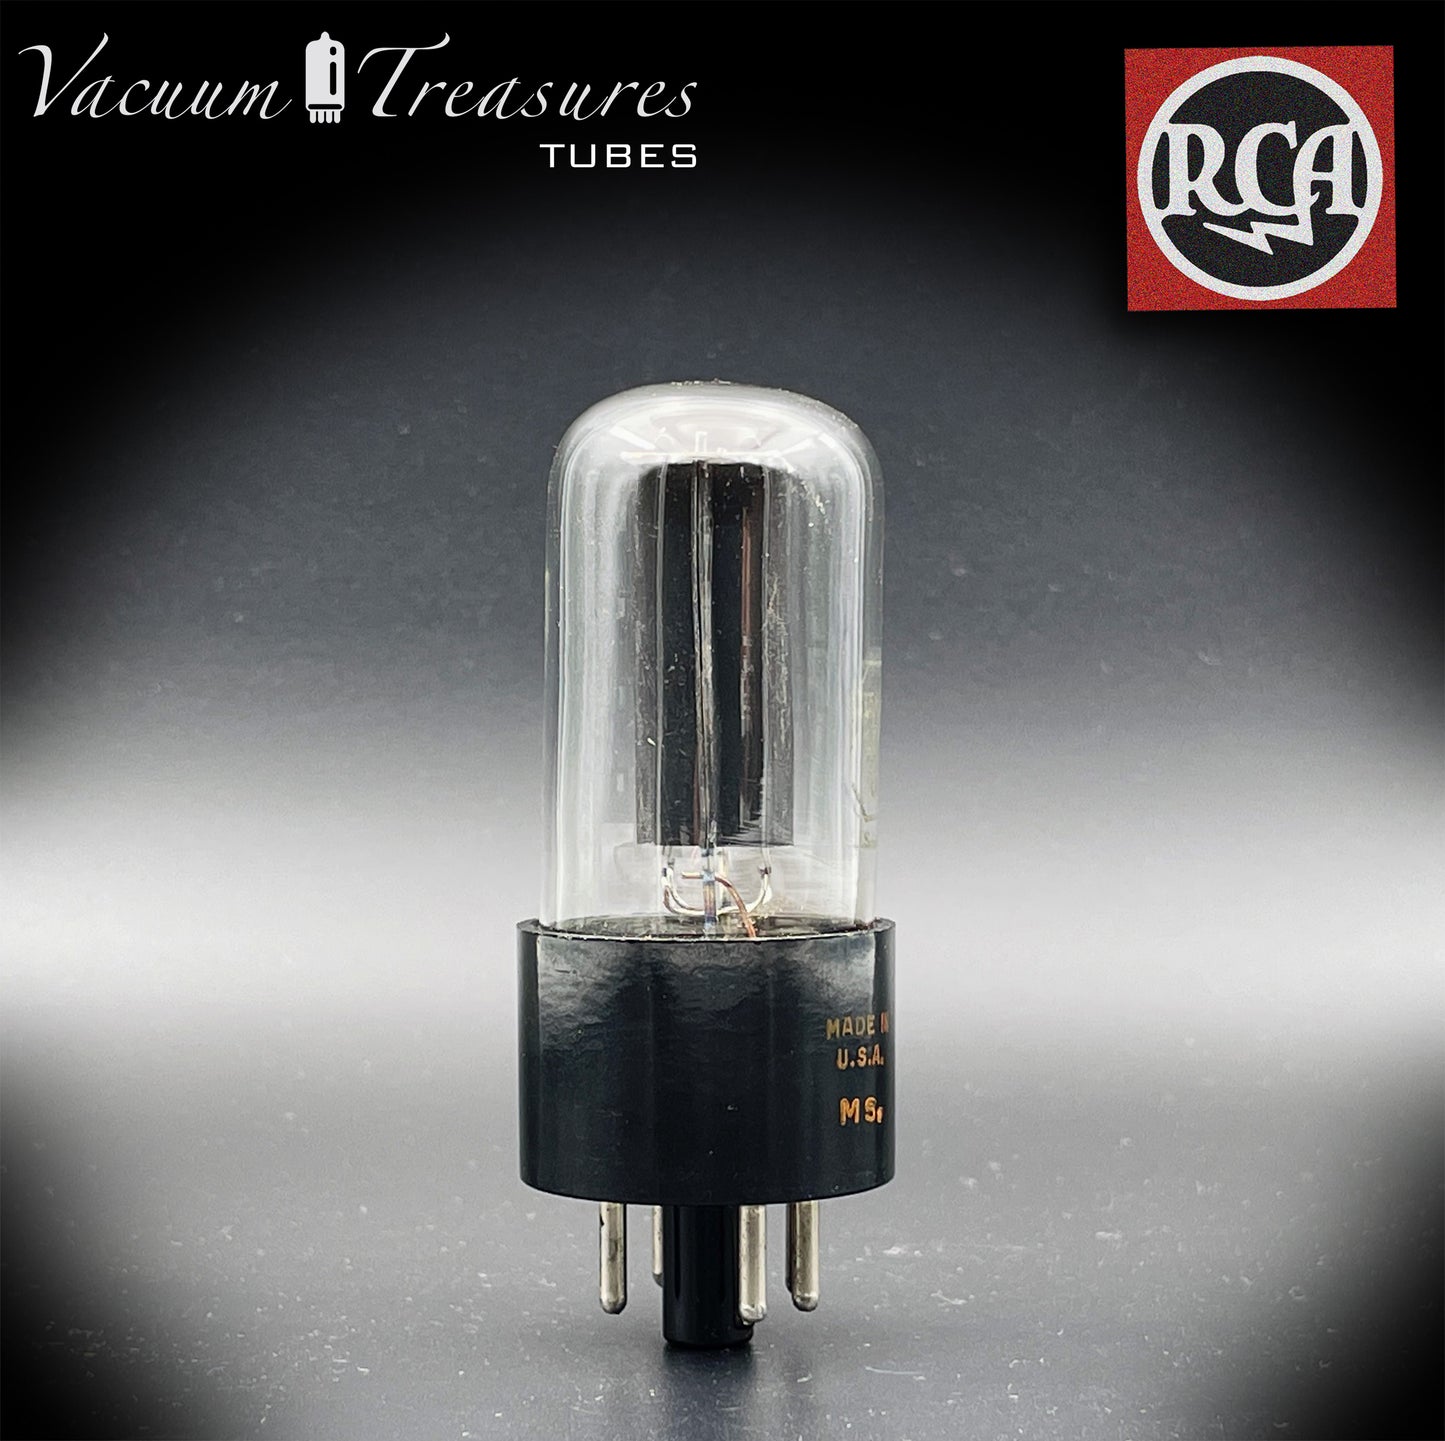 5Y3GT ( 5Z2P ) RCA Black Plates D/[] Getter Tube Rectifier Made in USA '56